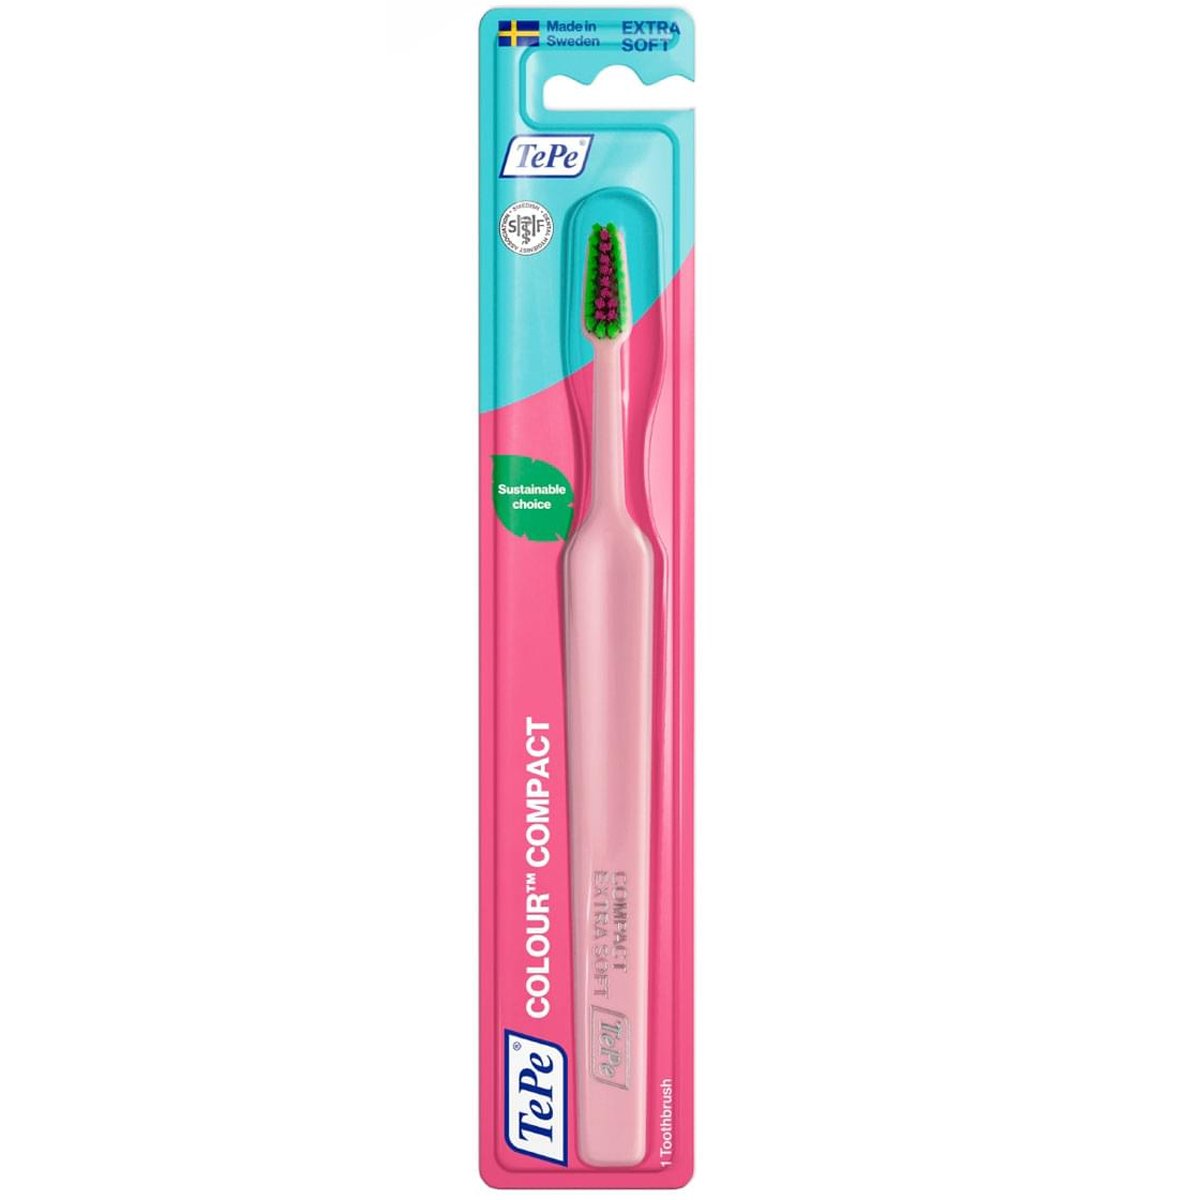 TePe Colour Compact Extra Soft Toothbrush Πολύ Μαλακή Οδοντόβουρτσα για Αποτελεσματικό & Απαλό Καθαρισμό 1 Τεμάχιο – Ροζ